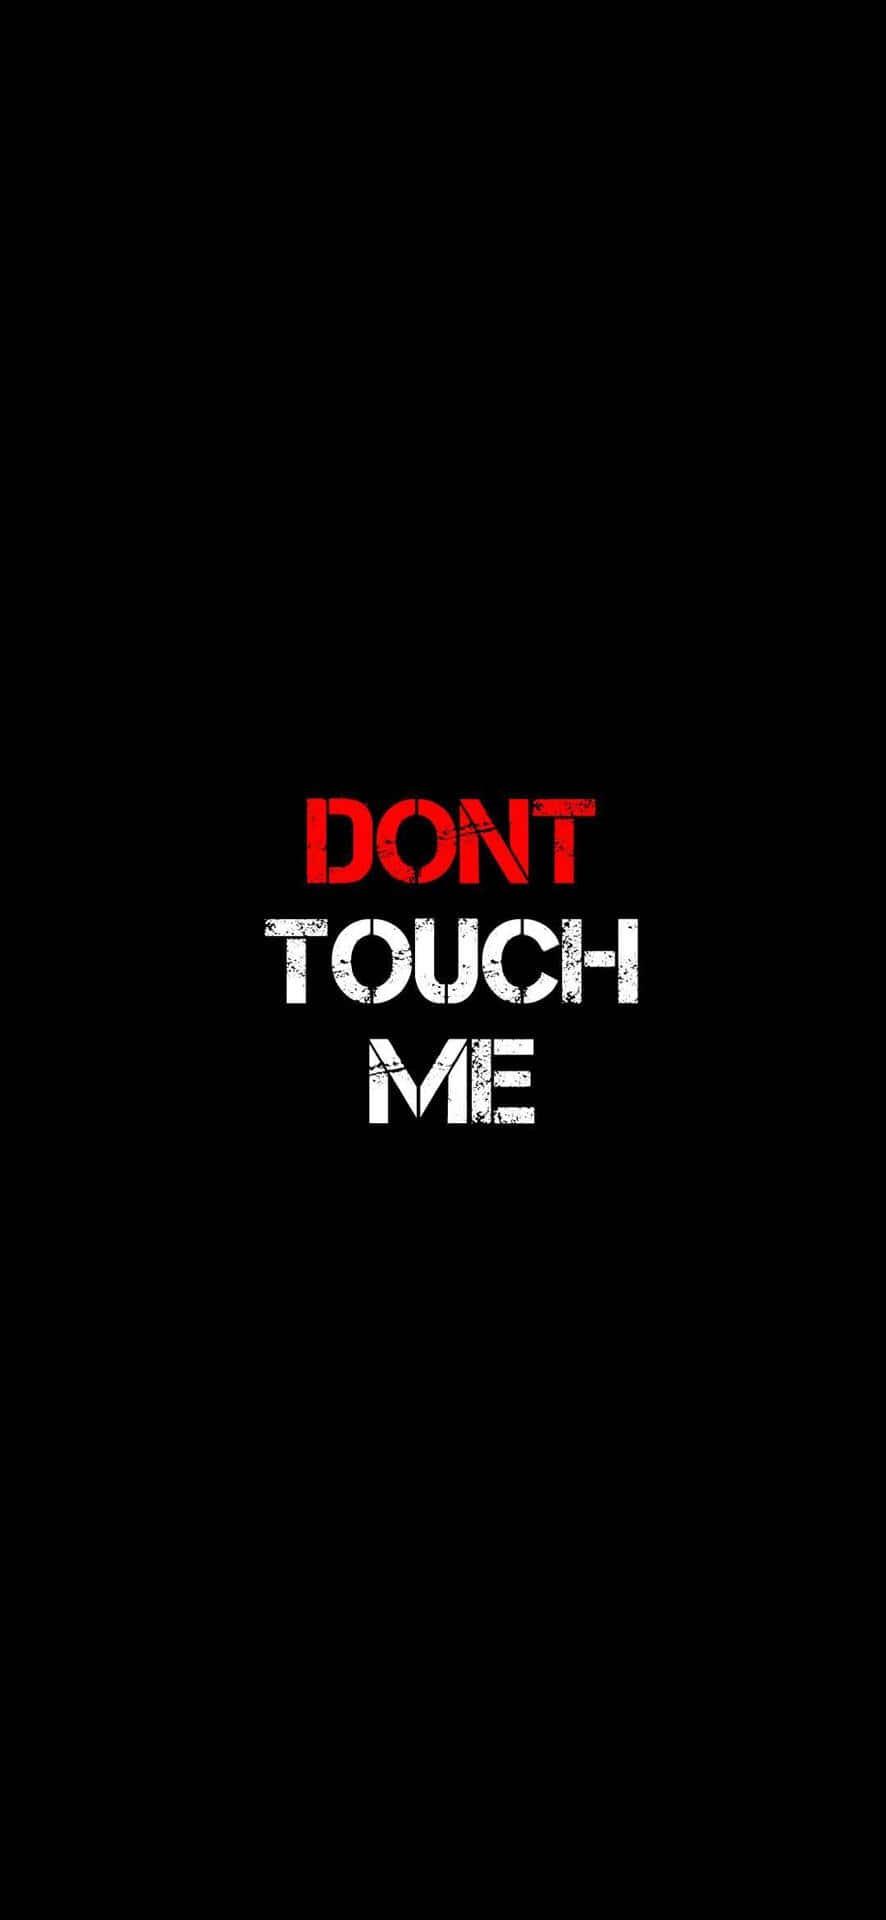 Don't Touch Me - Hd Wallpapers Wallpaper